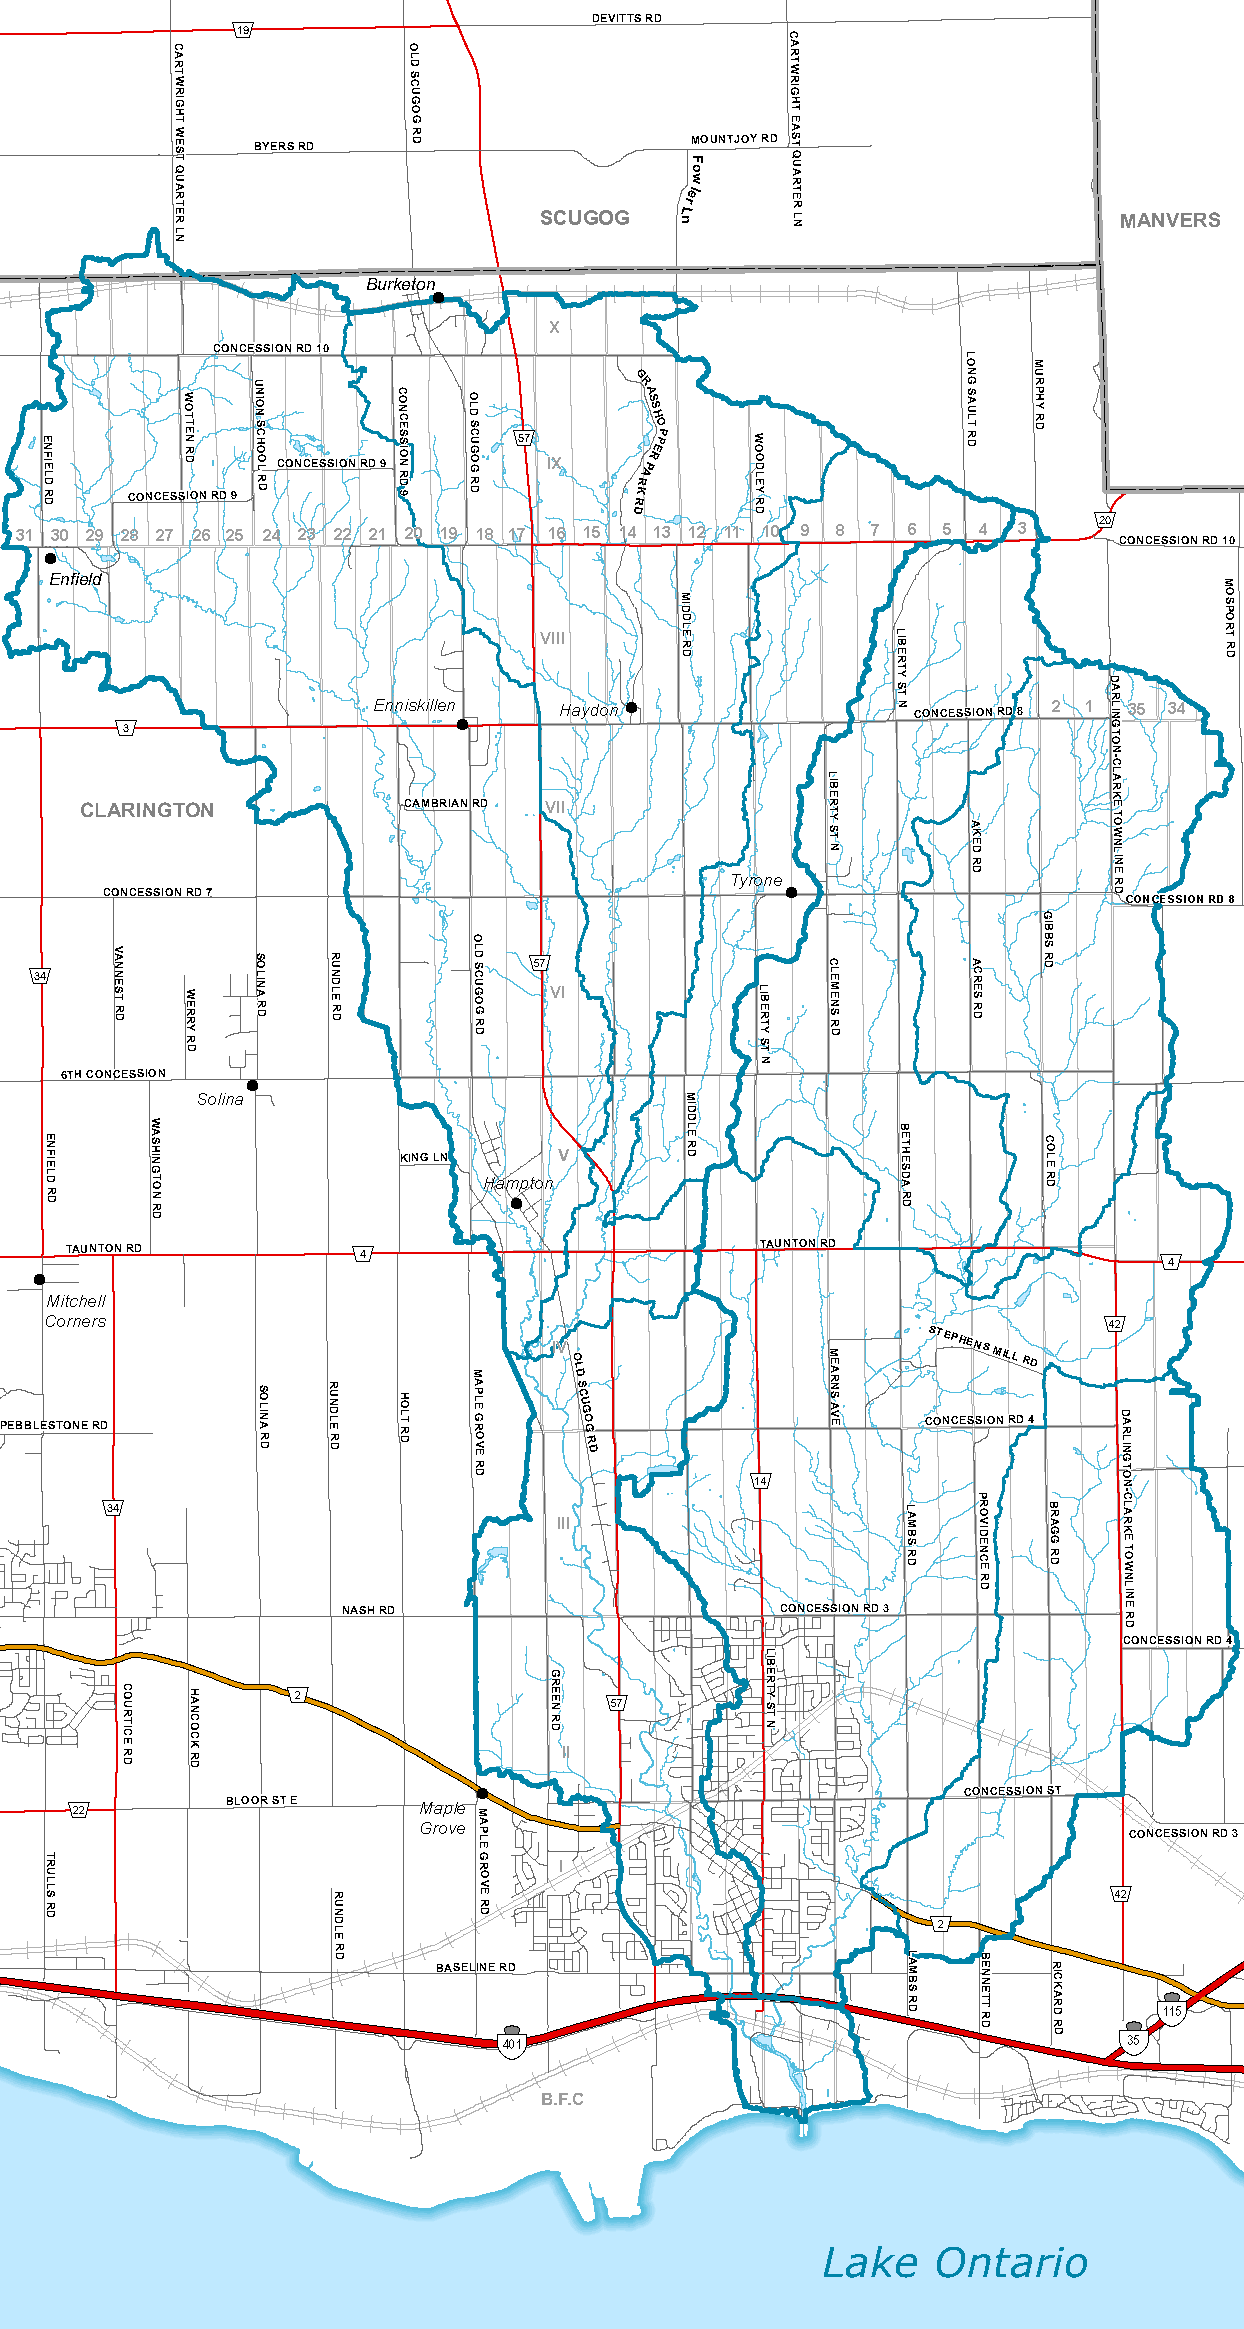 Click for a larger map of the Bowmanville/Soper Creek Watershed.